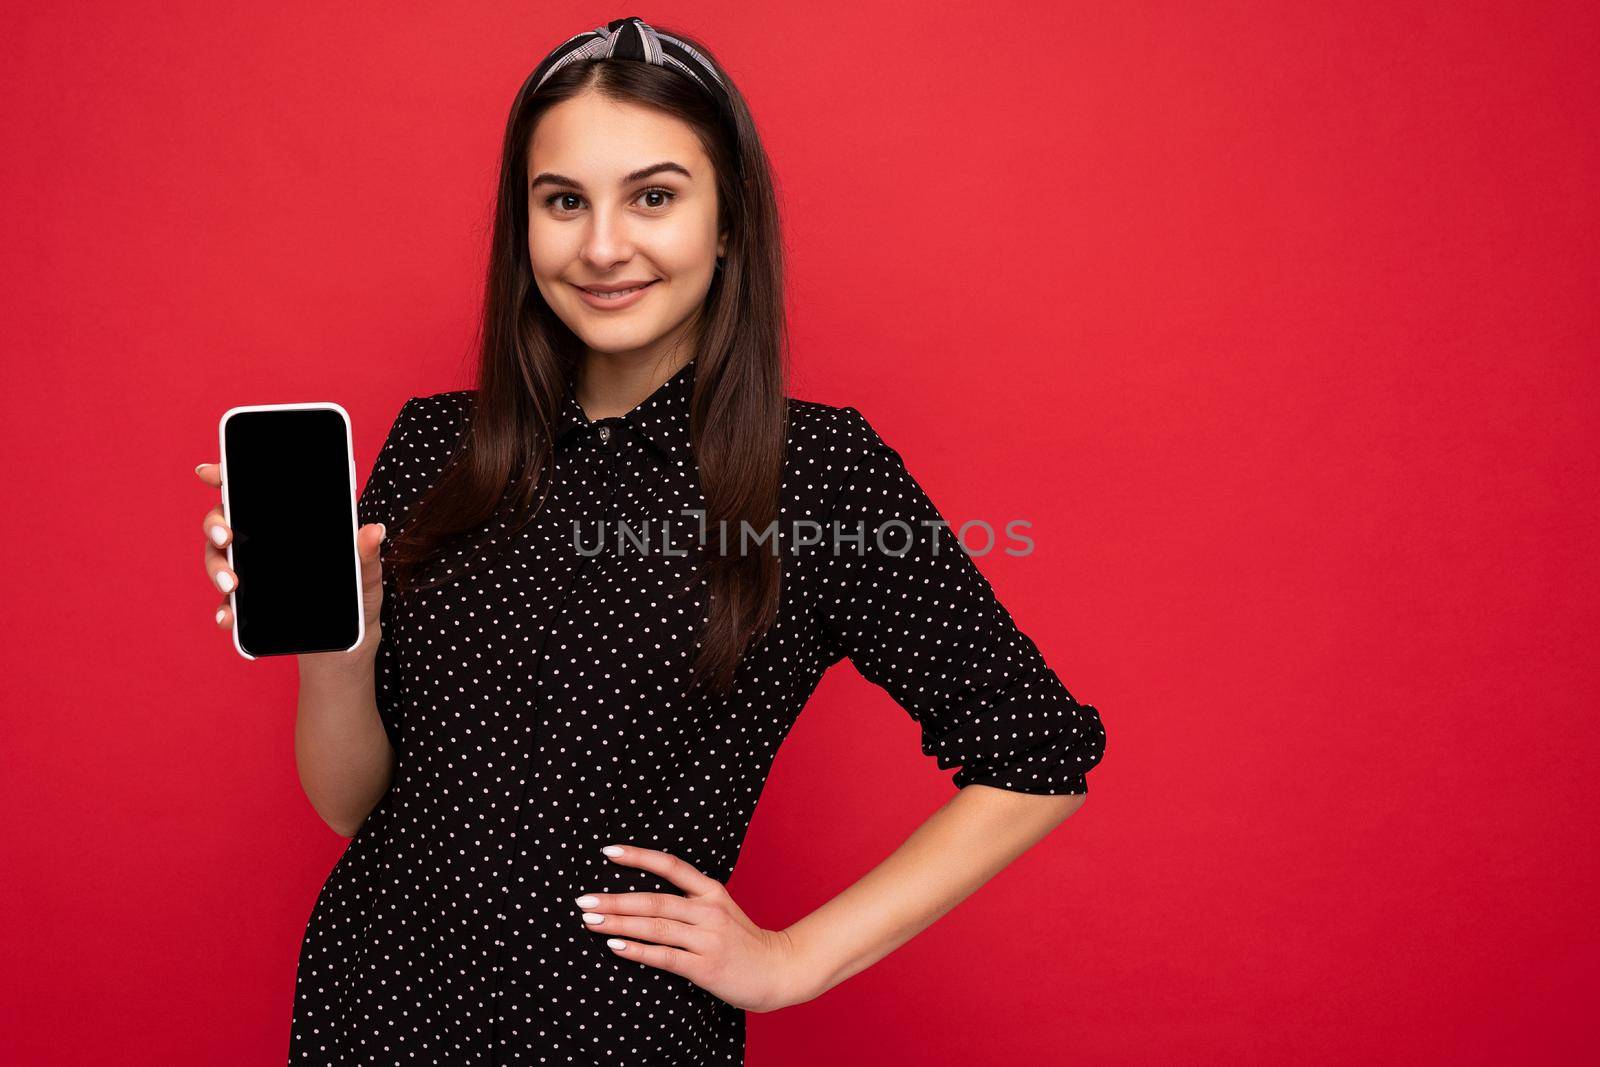 Photo of beautiful smiling girl good looking wearing casual stylish outfit standing isolated on background with copy space holding smartphone showing phone in hand with empty screen display for mockup looking at camera.